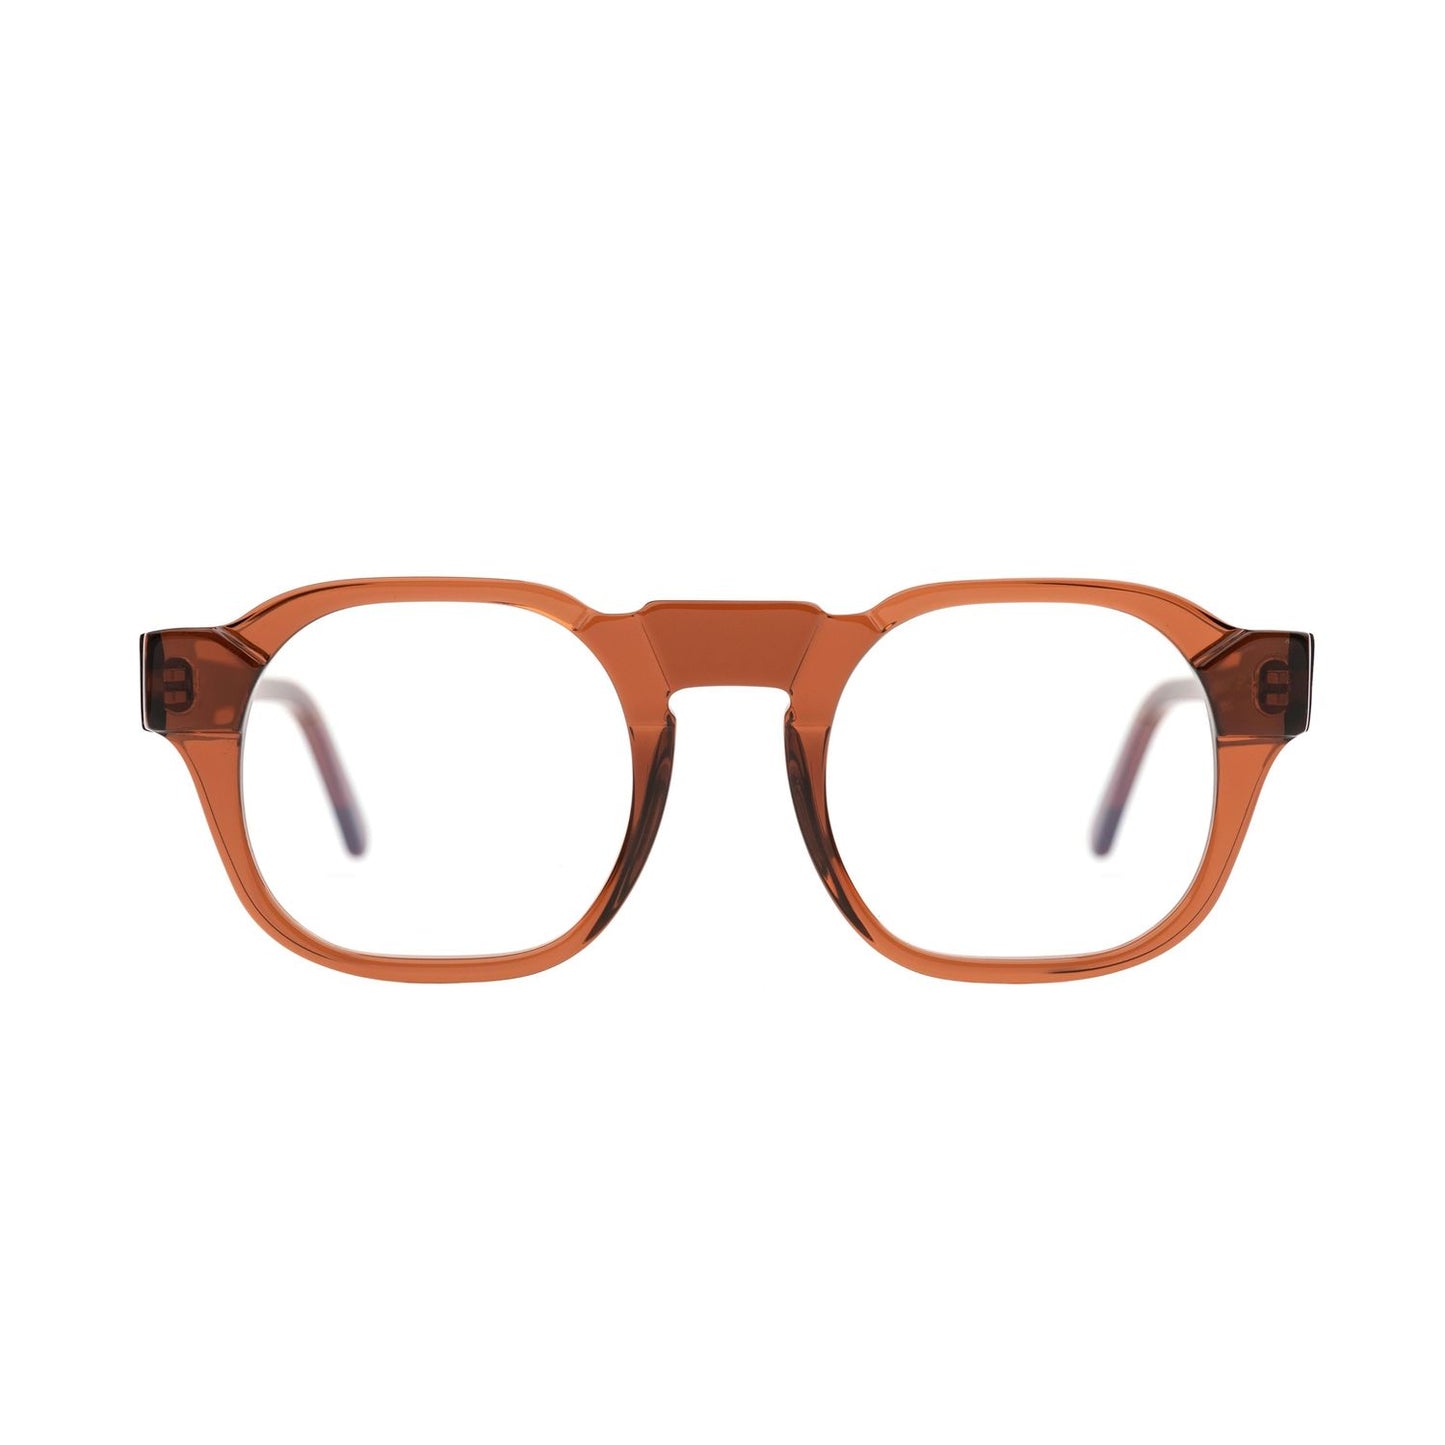 <p> Kuboraum MASKE K11 is a  Brown; Acetate Optical Frame with a Round shape.  </p><p>Shop with confidence from Adair Eyewear, a Kuboraum Authorized Dealer.  We have provided the best in customer service and great designer eyewear for over 40 years. Visit https://adaireyewearonline.com</p>